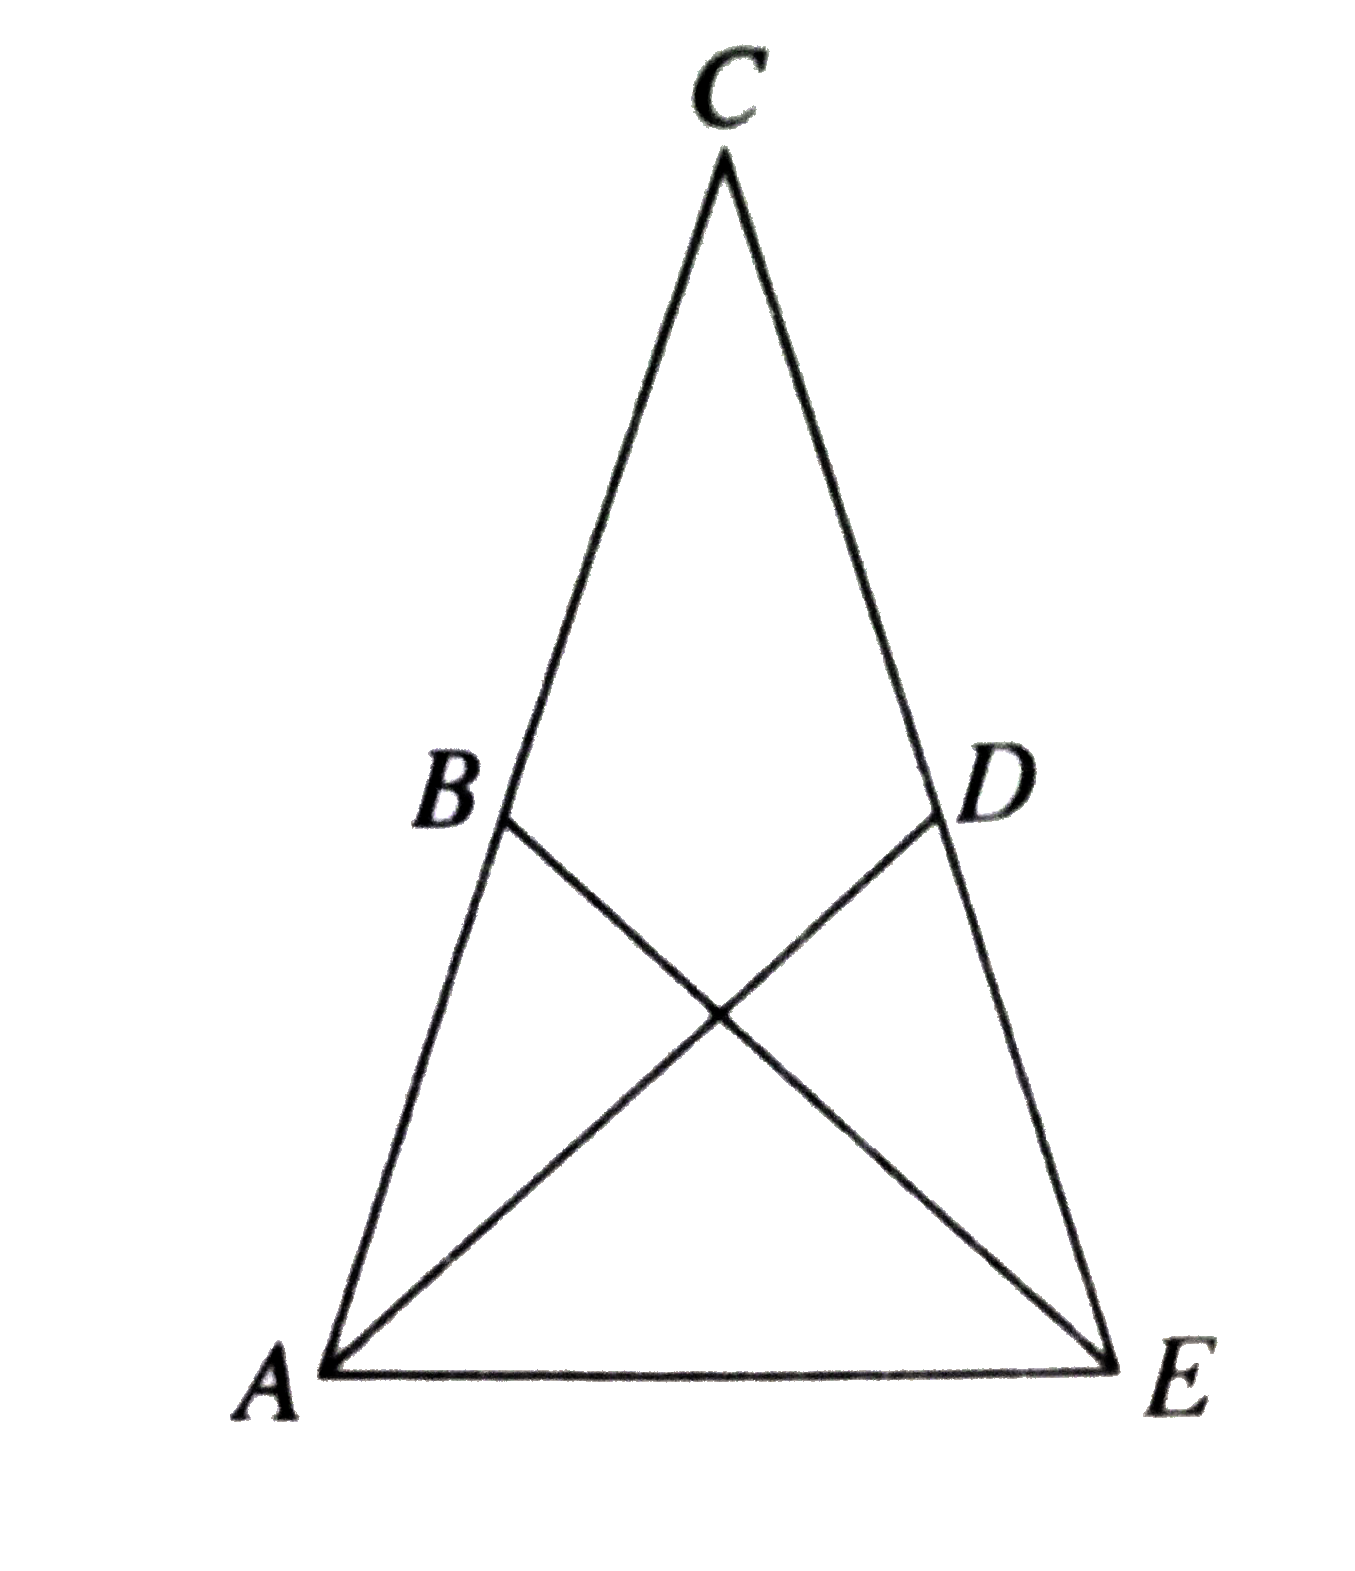 Triangle triangleACE, shown in the figure below, is isosceles with base bar(AE). B lies on bar(AC) and D lies on bar(CE) . Segments bar(BE) and bar(AD) bisect angleAEC and angleCAE, respectively. Which one of the following angle congruences is necessarily true ?